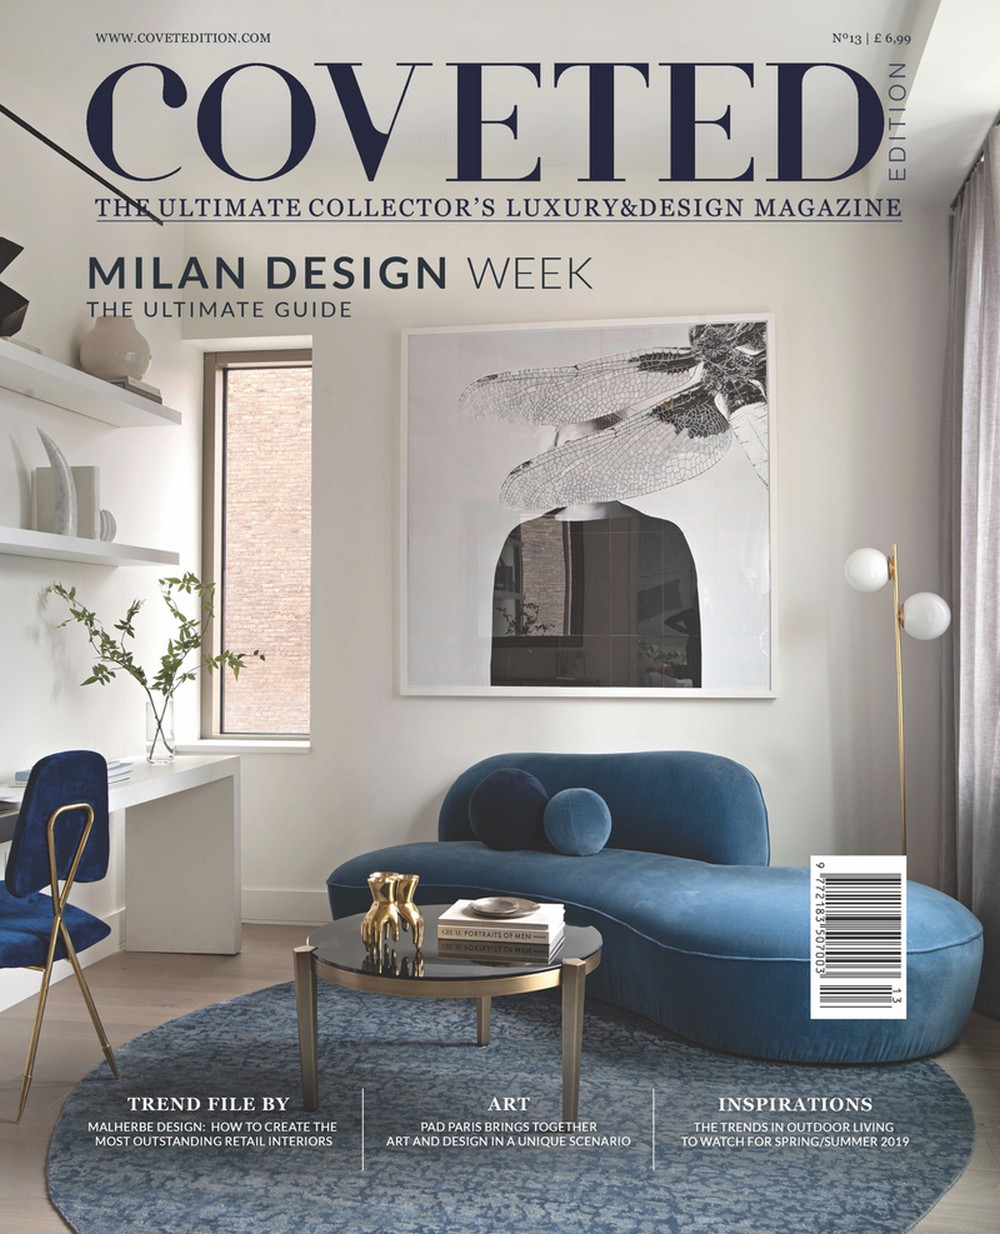 Discover the Best Interior Design Magazines To Follow On Pinterest interior design magazines Discover the Best Interior Design Magazines To Follow On Pinterest Discover the Best Interior Design Magazines To Follow On Pinterest 3